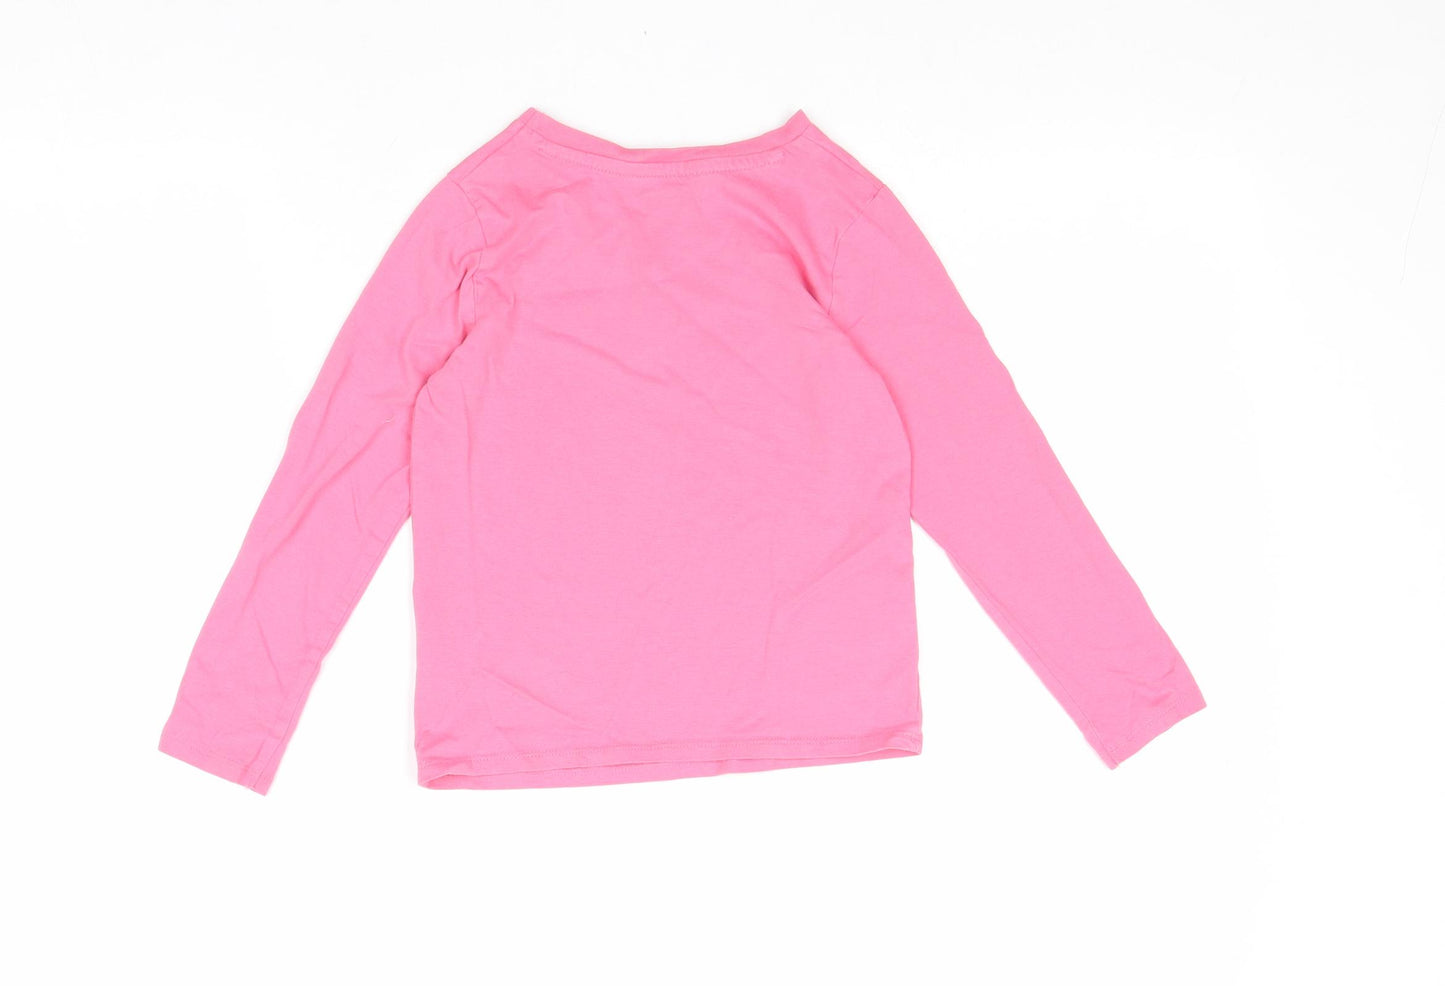 George Girls Pink 100% Cotton Basic T-Shirt Size 5-6 Years Round Neck Pullover